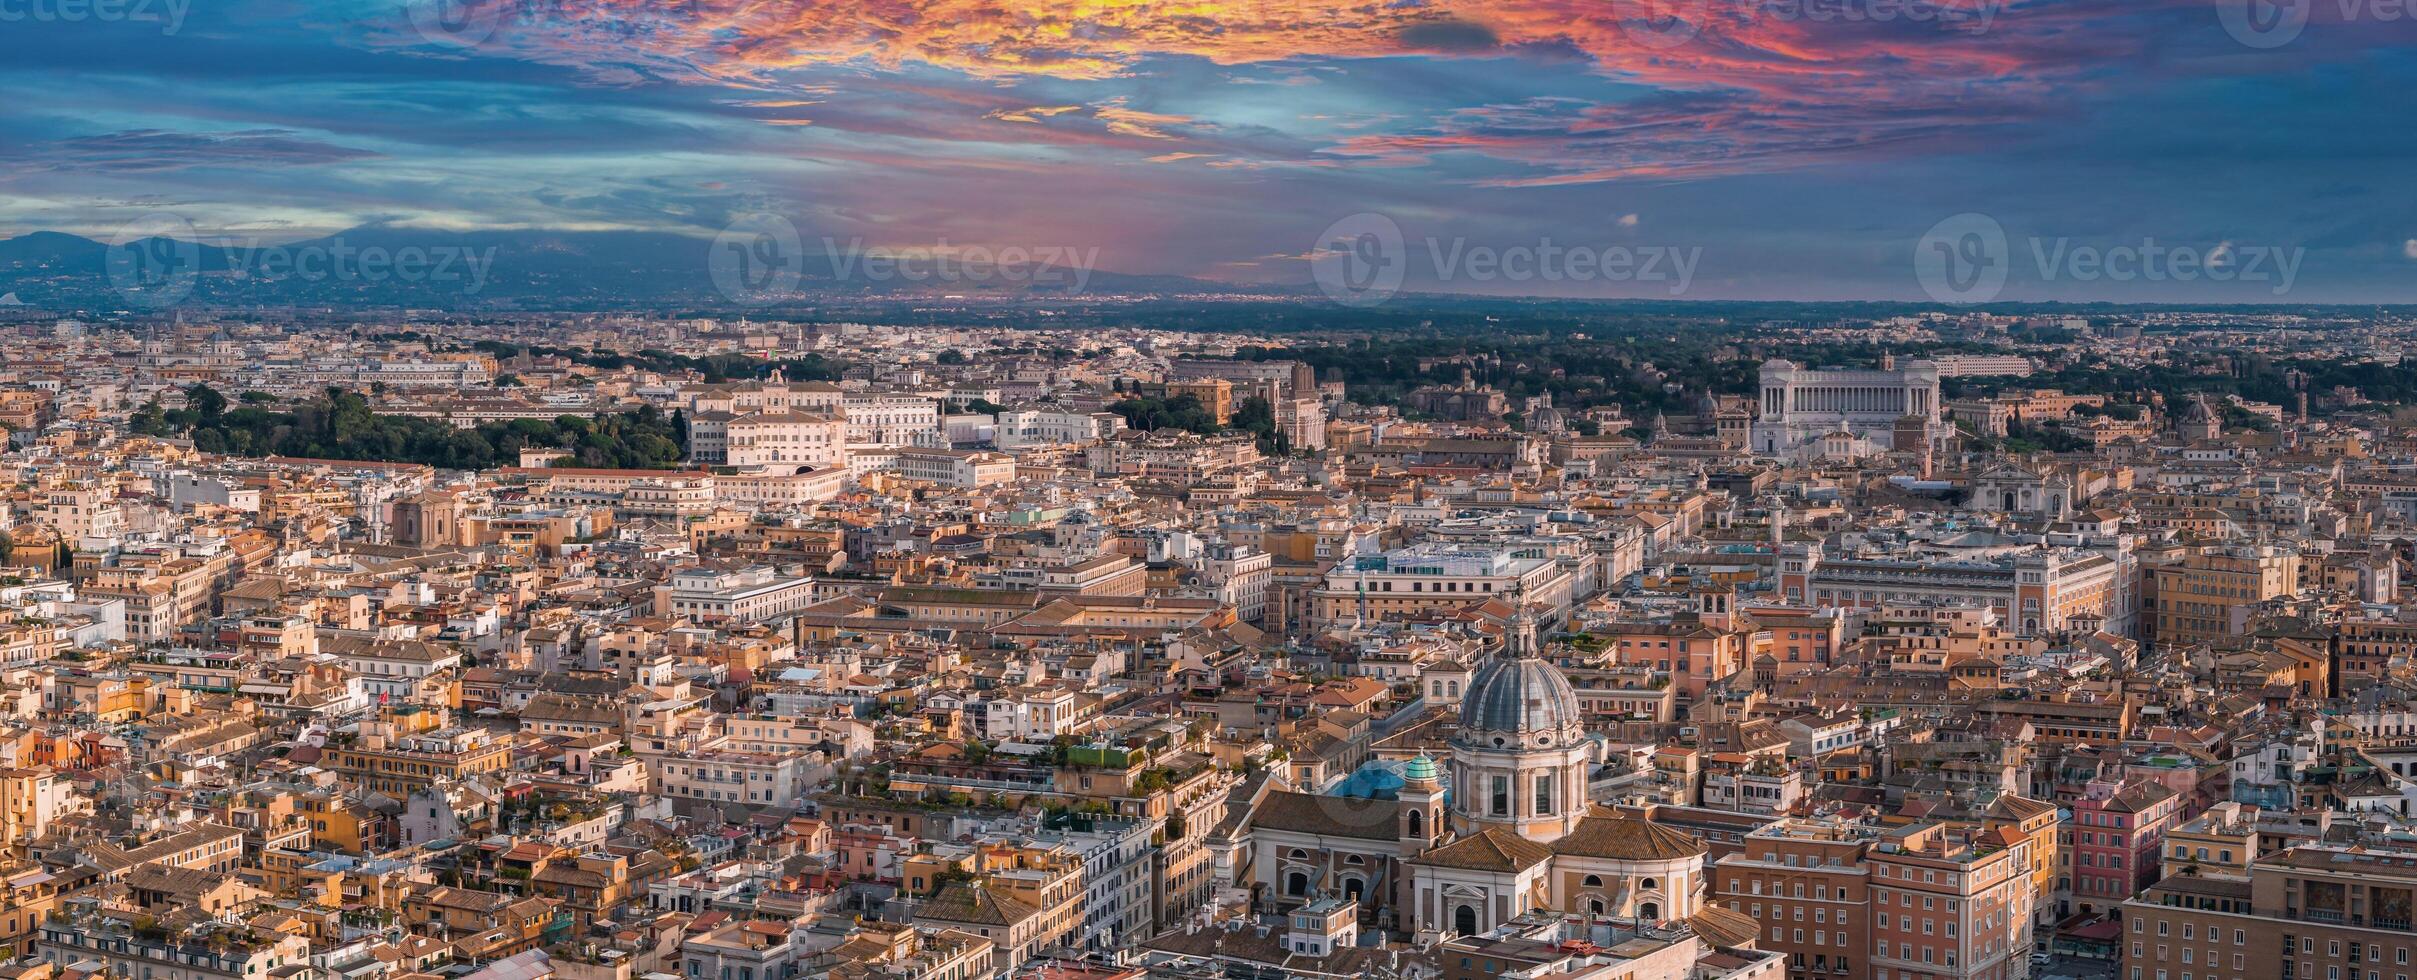 Aerial View of Rome at Dusk  Historic Architecture and Sunset Sky photo